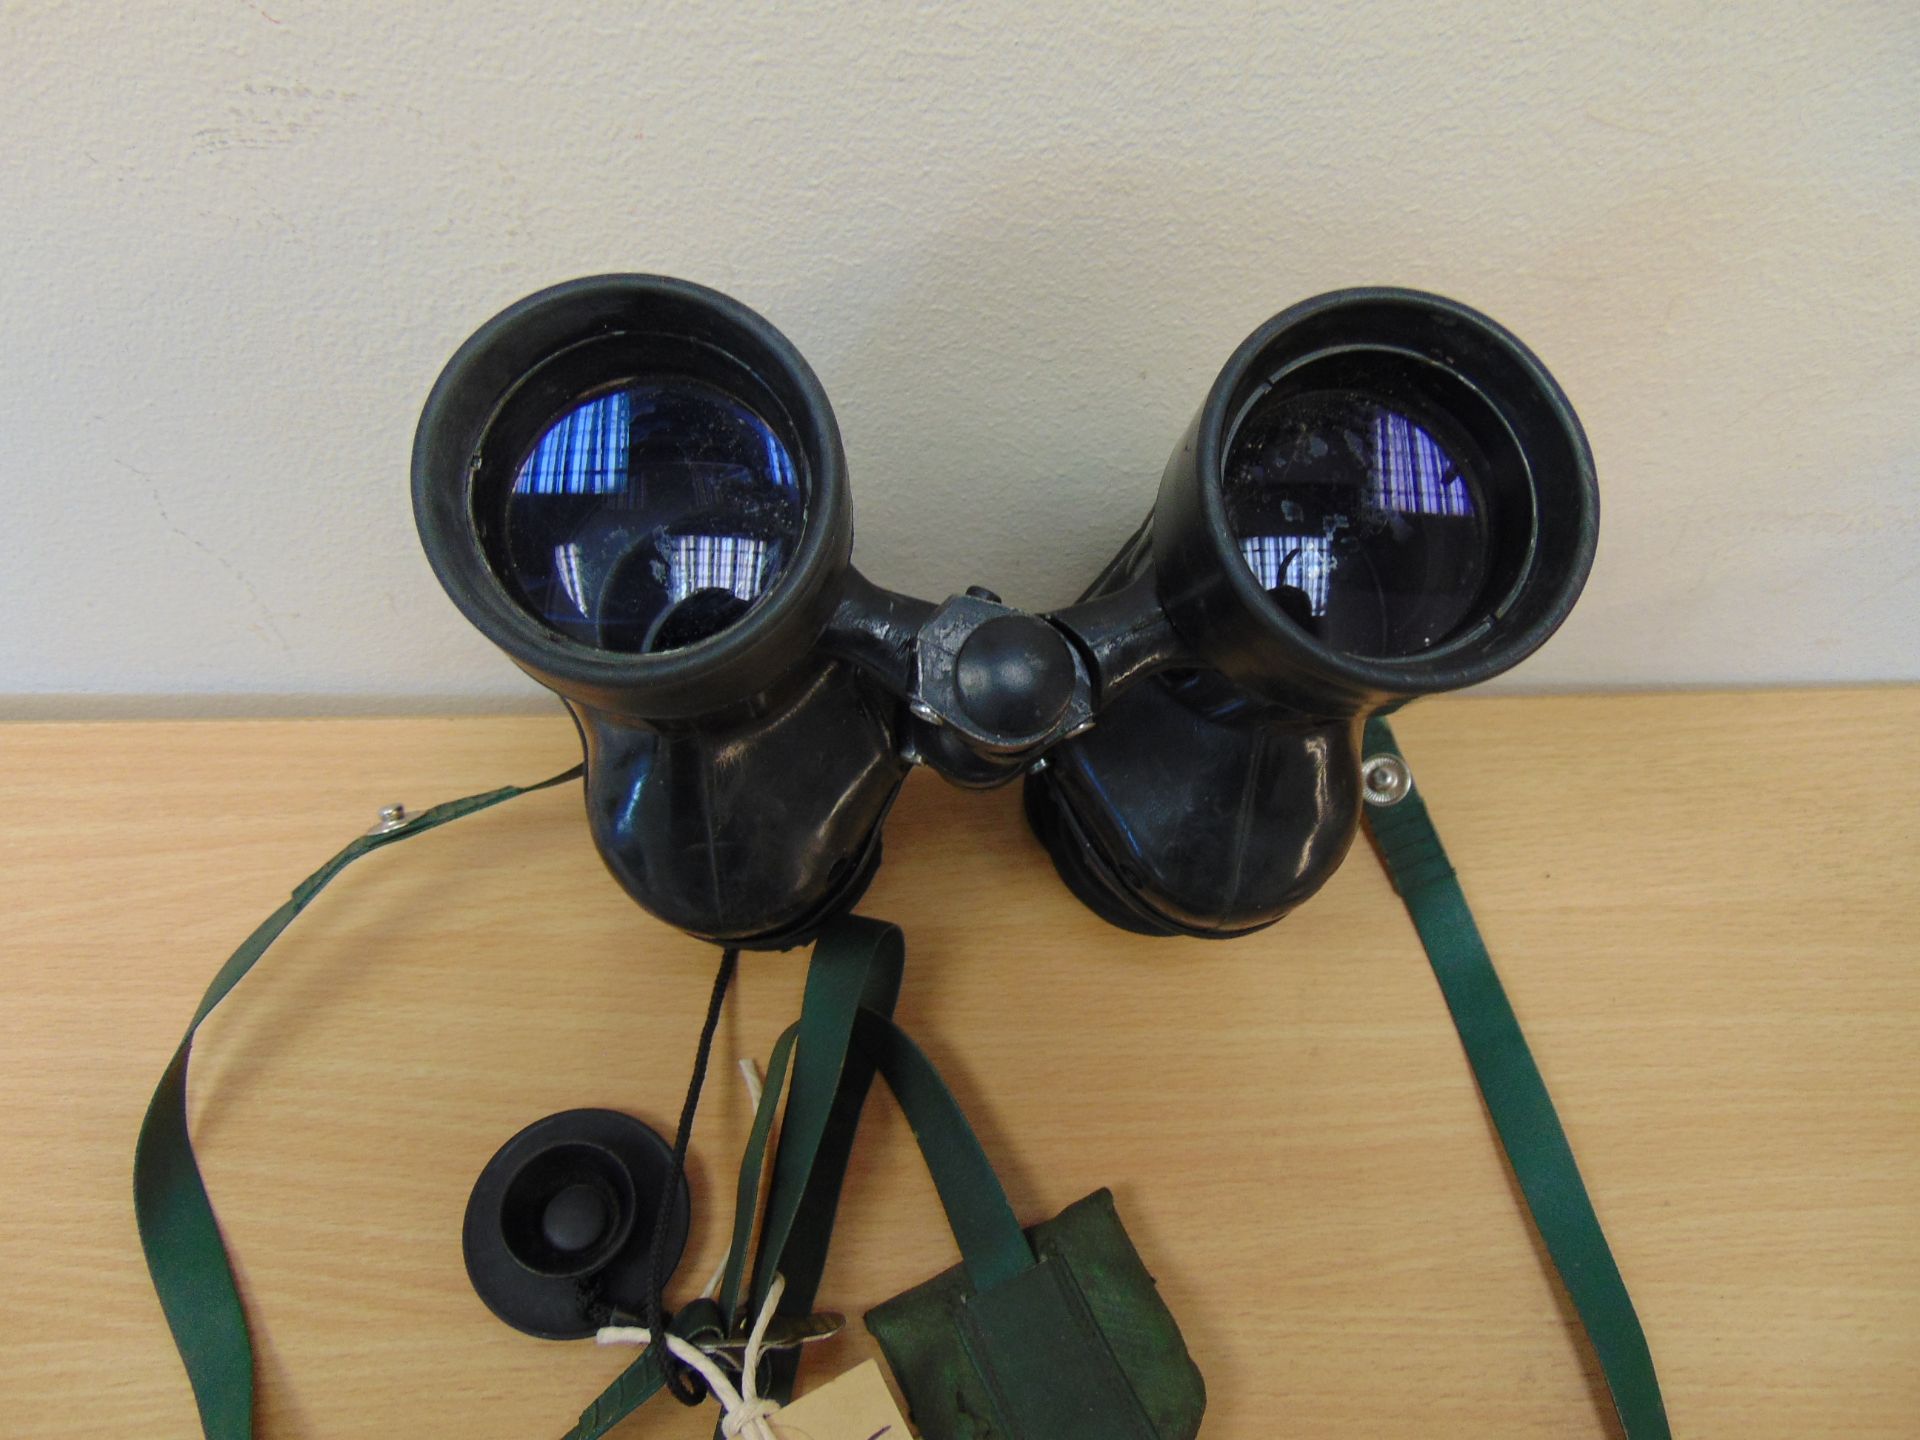 1 x Pair of Avimo L12A1 Self Focusing British Army Binos with graticule in mils 7x42 c/w filters - Image 3 of 5